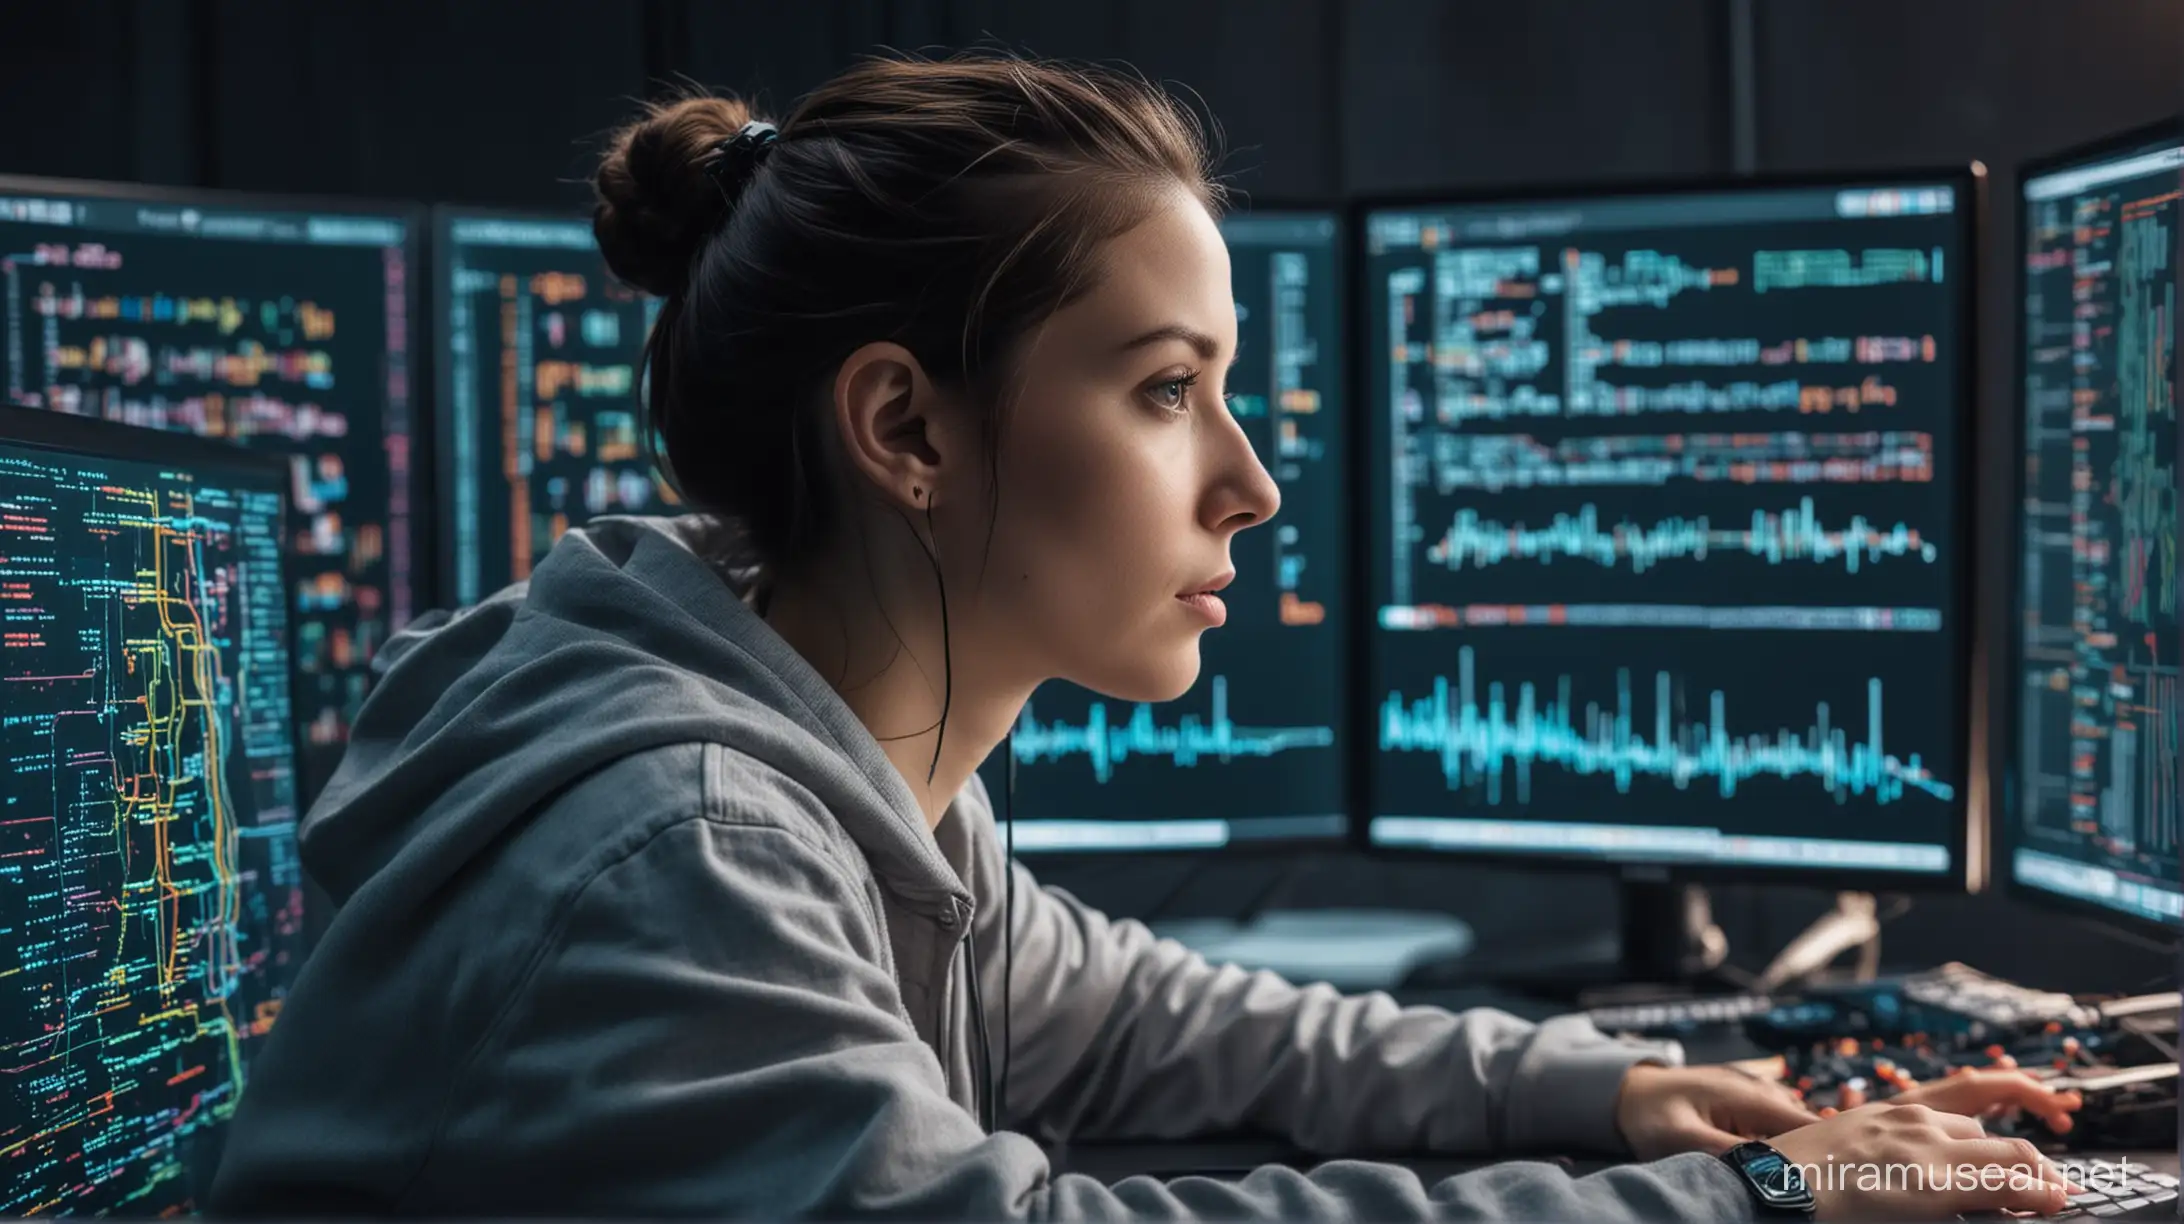  An AI programmer engrossed in coding, surrounded by monitors displaying lines of code and data visualizations, with vibrant Python logos in the background symbolizing the language's influence, Photography, realistic style, using a 50mm prime lens, --ar 16:9